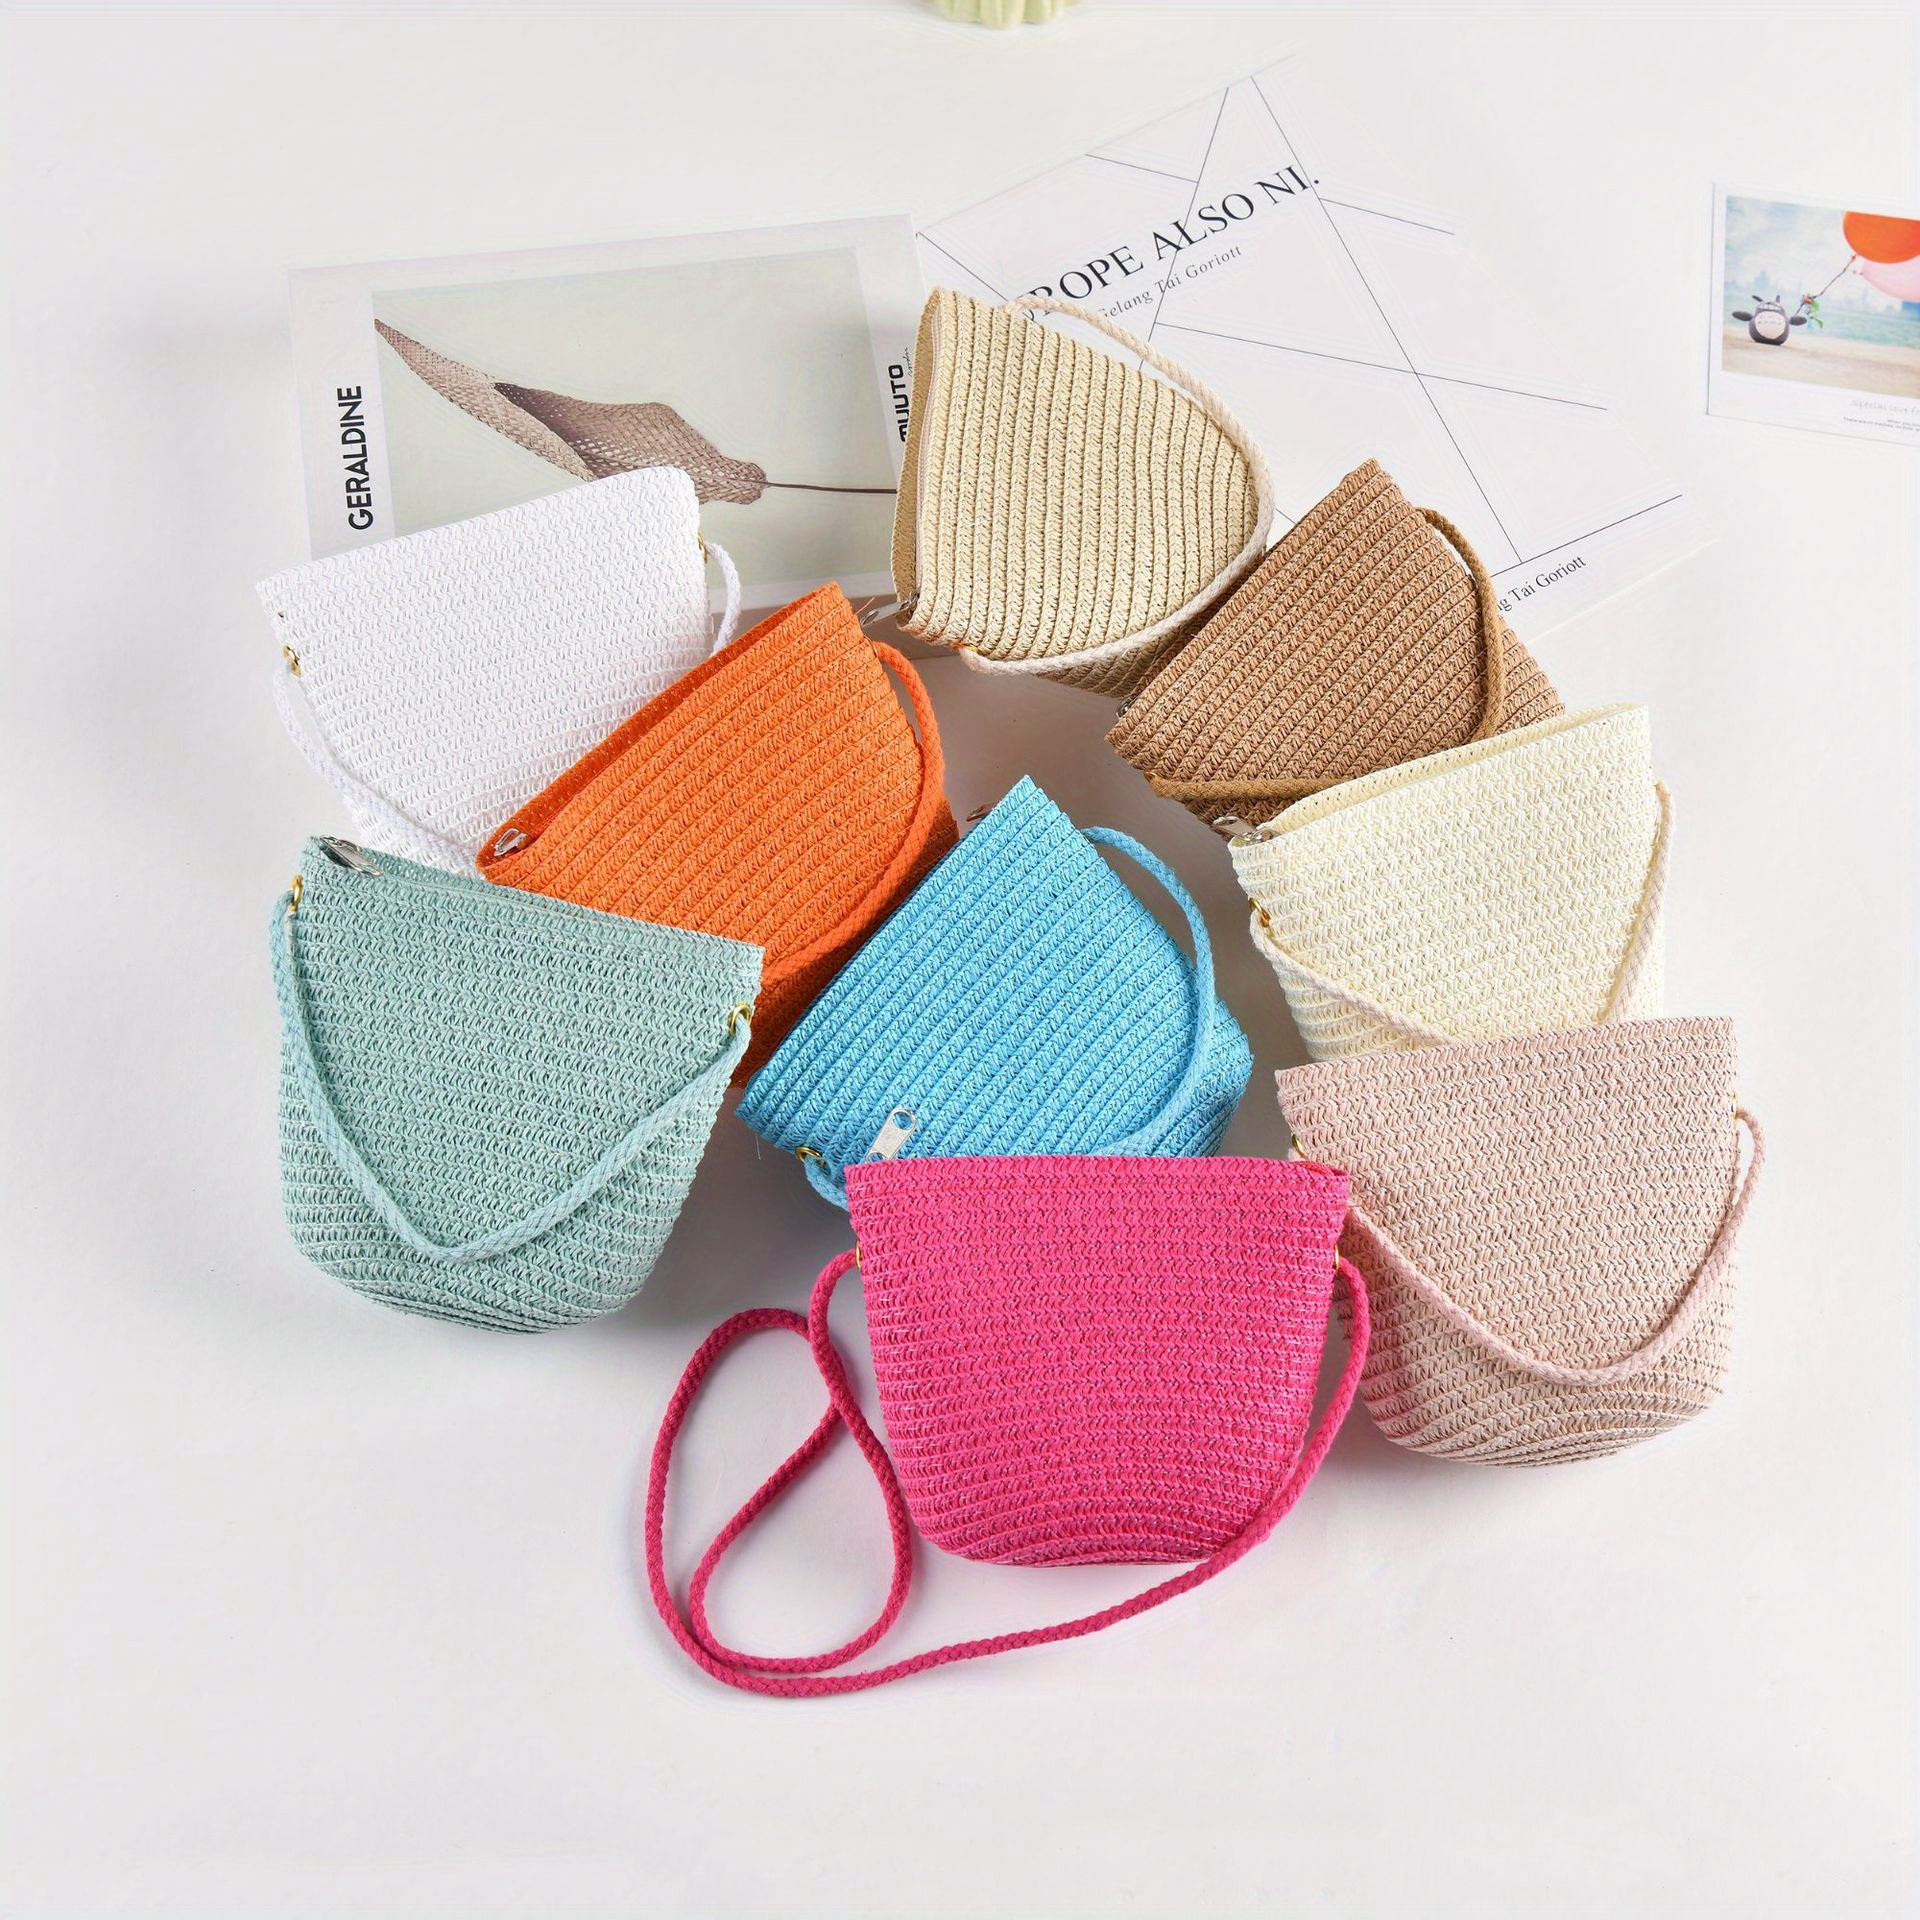 

Small Woven Shoulder Bags For Women, Colorful Crossbody Purses, Mobile Phone Wallets, Hand-held Bags With Detachable Straps